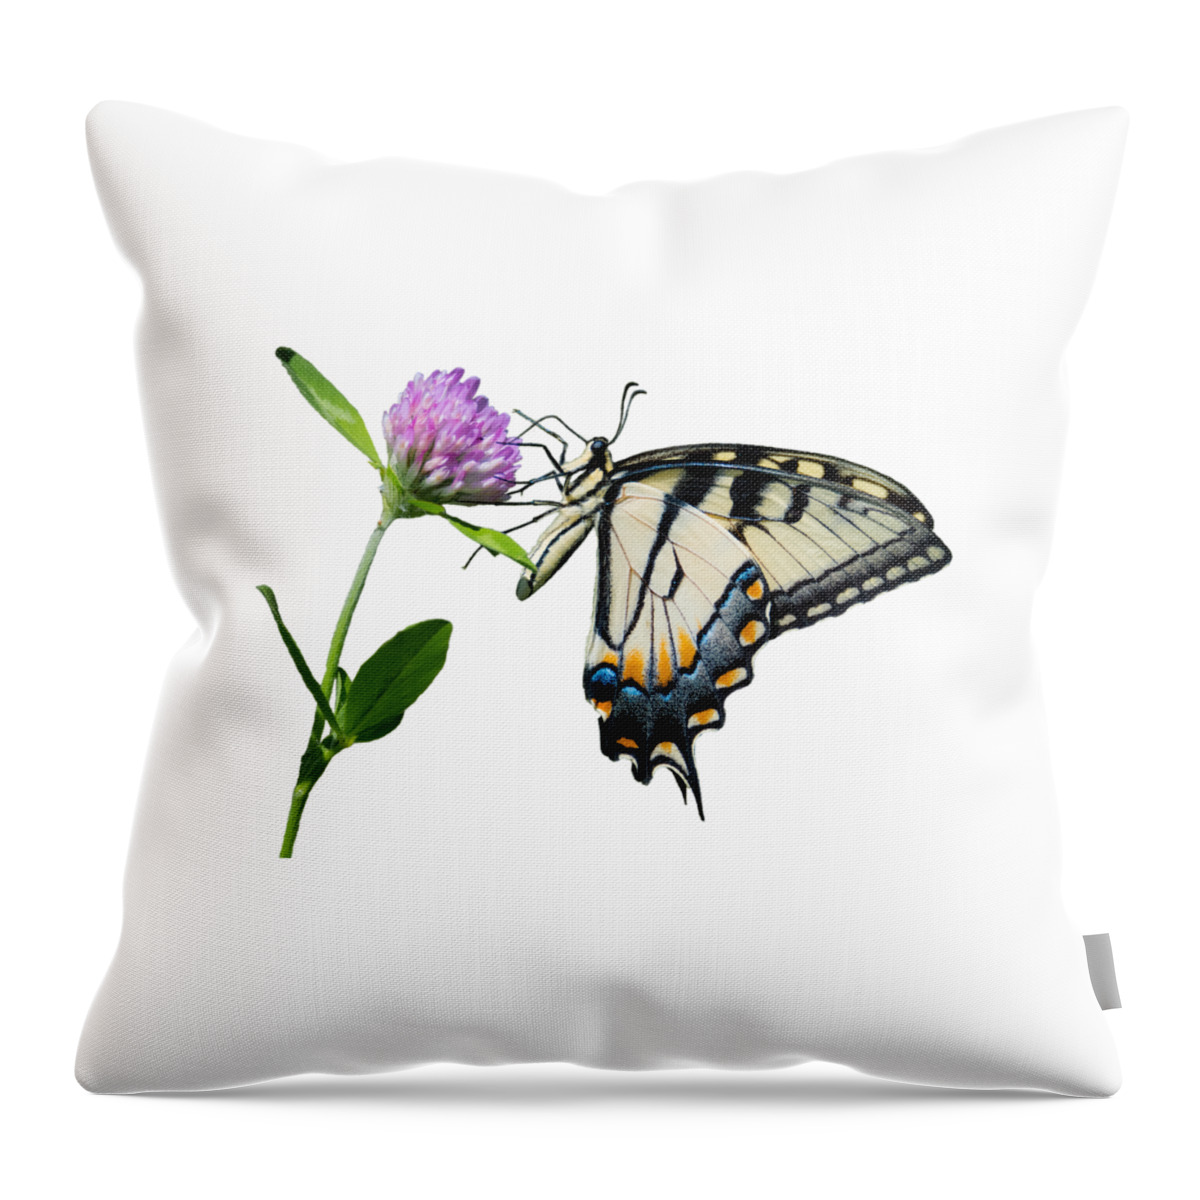 Tiger Swallowtail Butterfly Throw Pillow featuring the photograph Tiger Swallowtail Butterfly by Holden The Moment